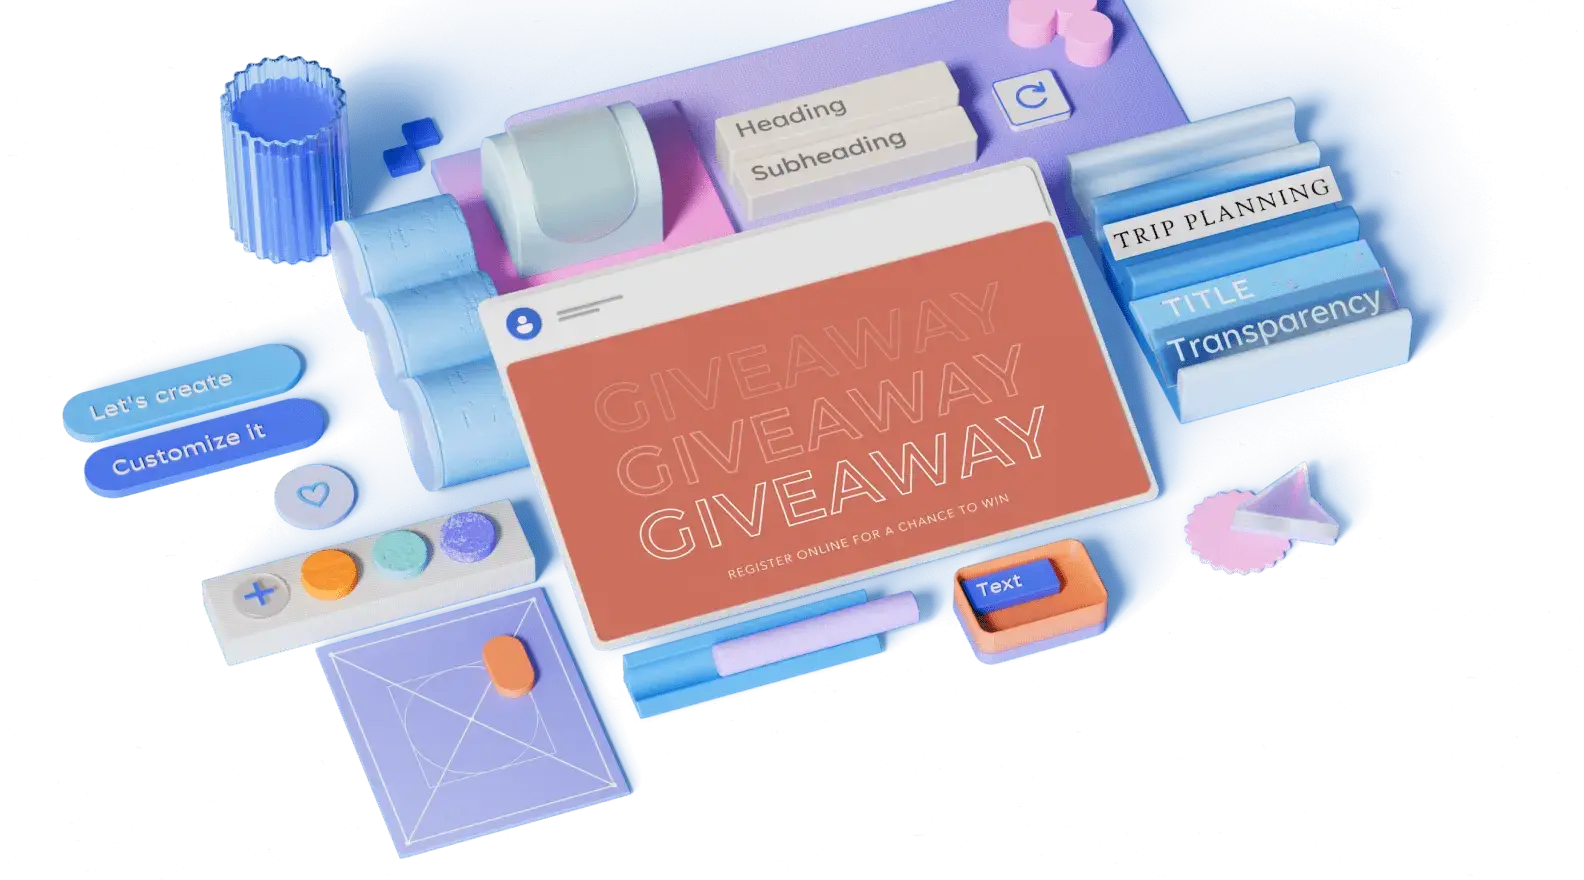 Giveaway template surrounded by 3D illustrated design elements